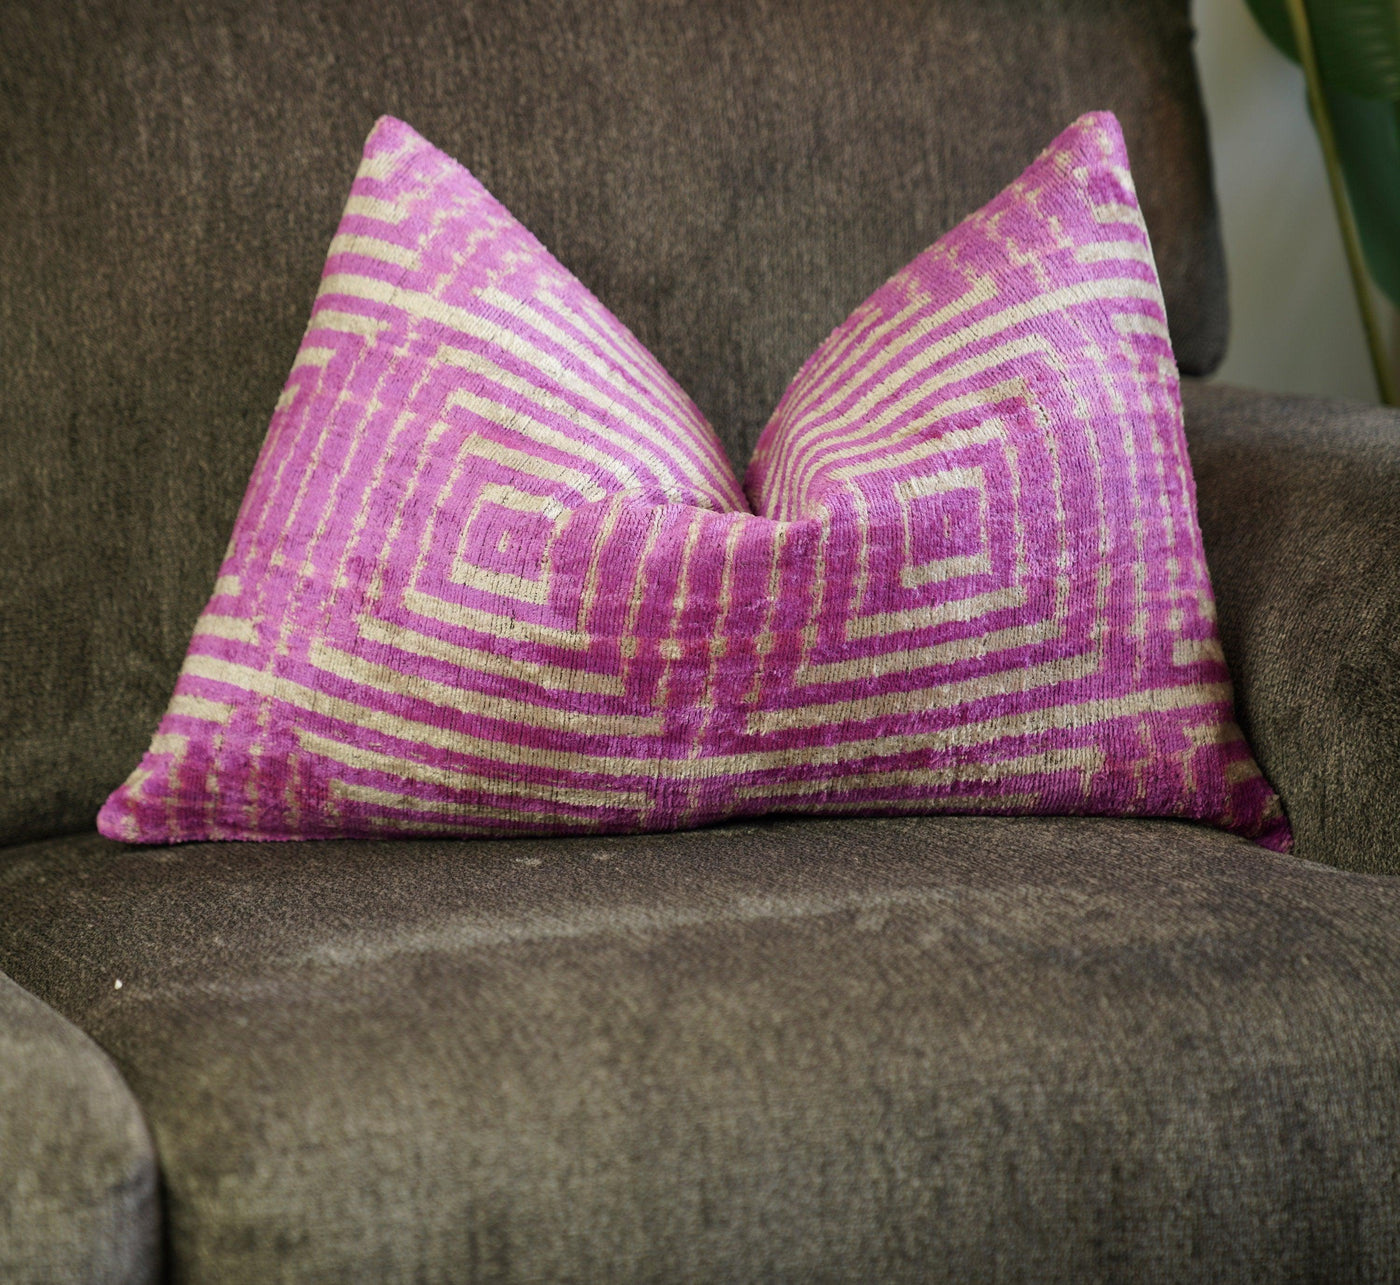 Canvello Decorative Pink Velvet Cushions | 16 x 24 in (40 x 60 cm)